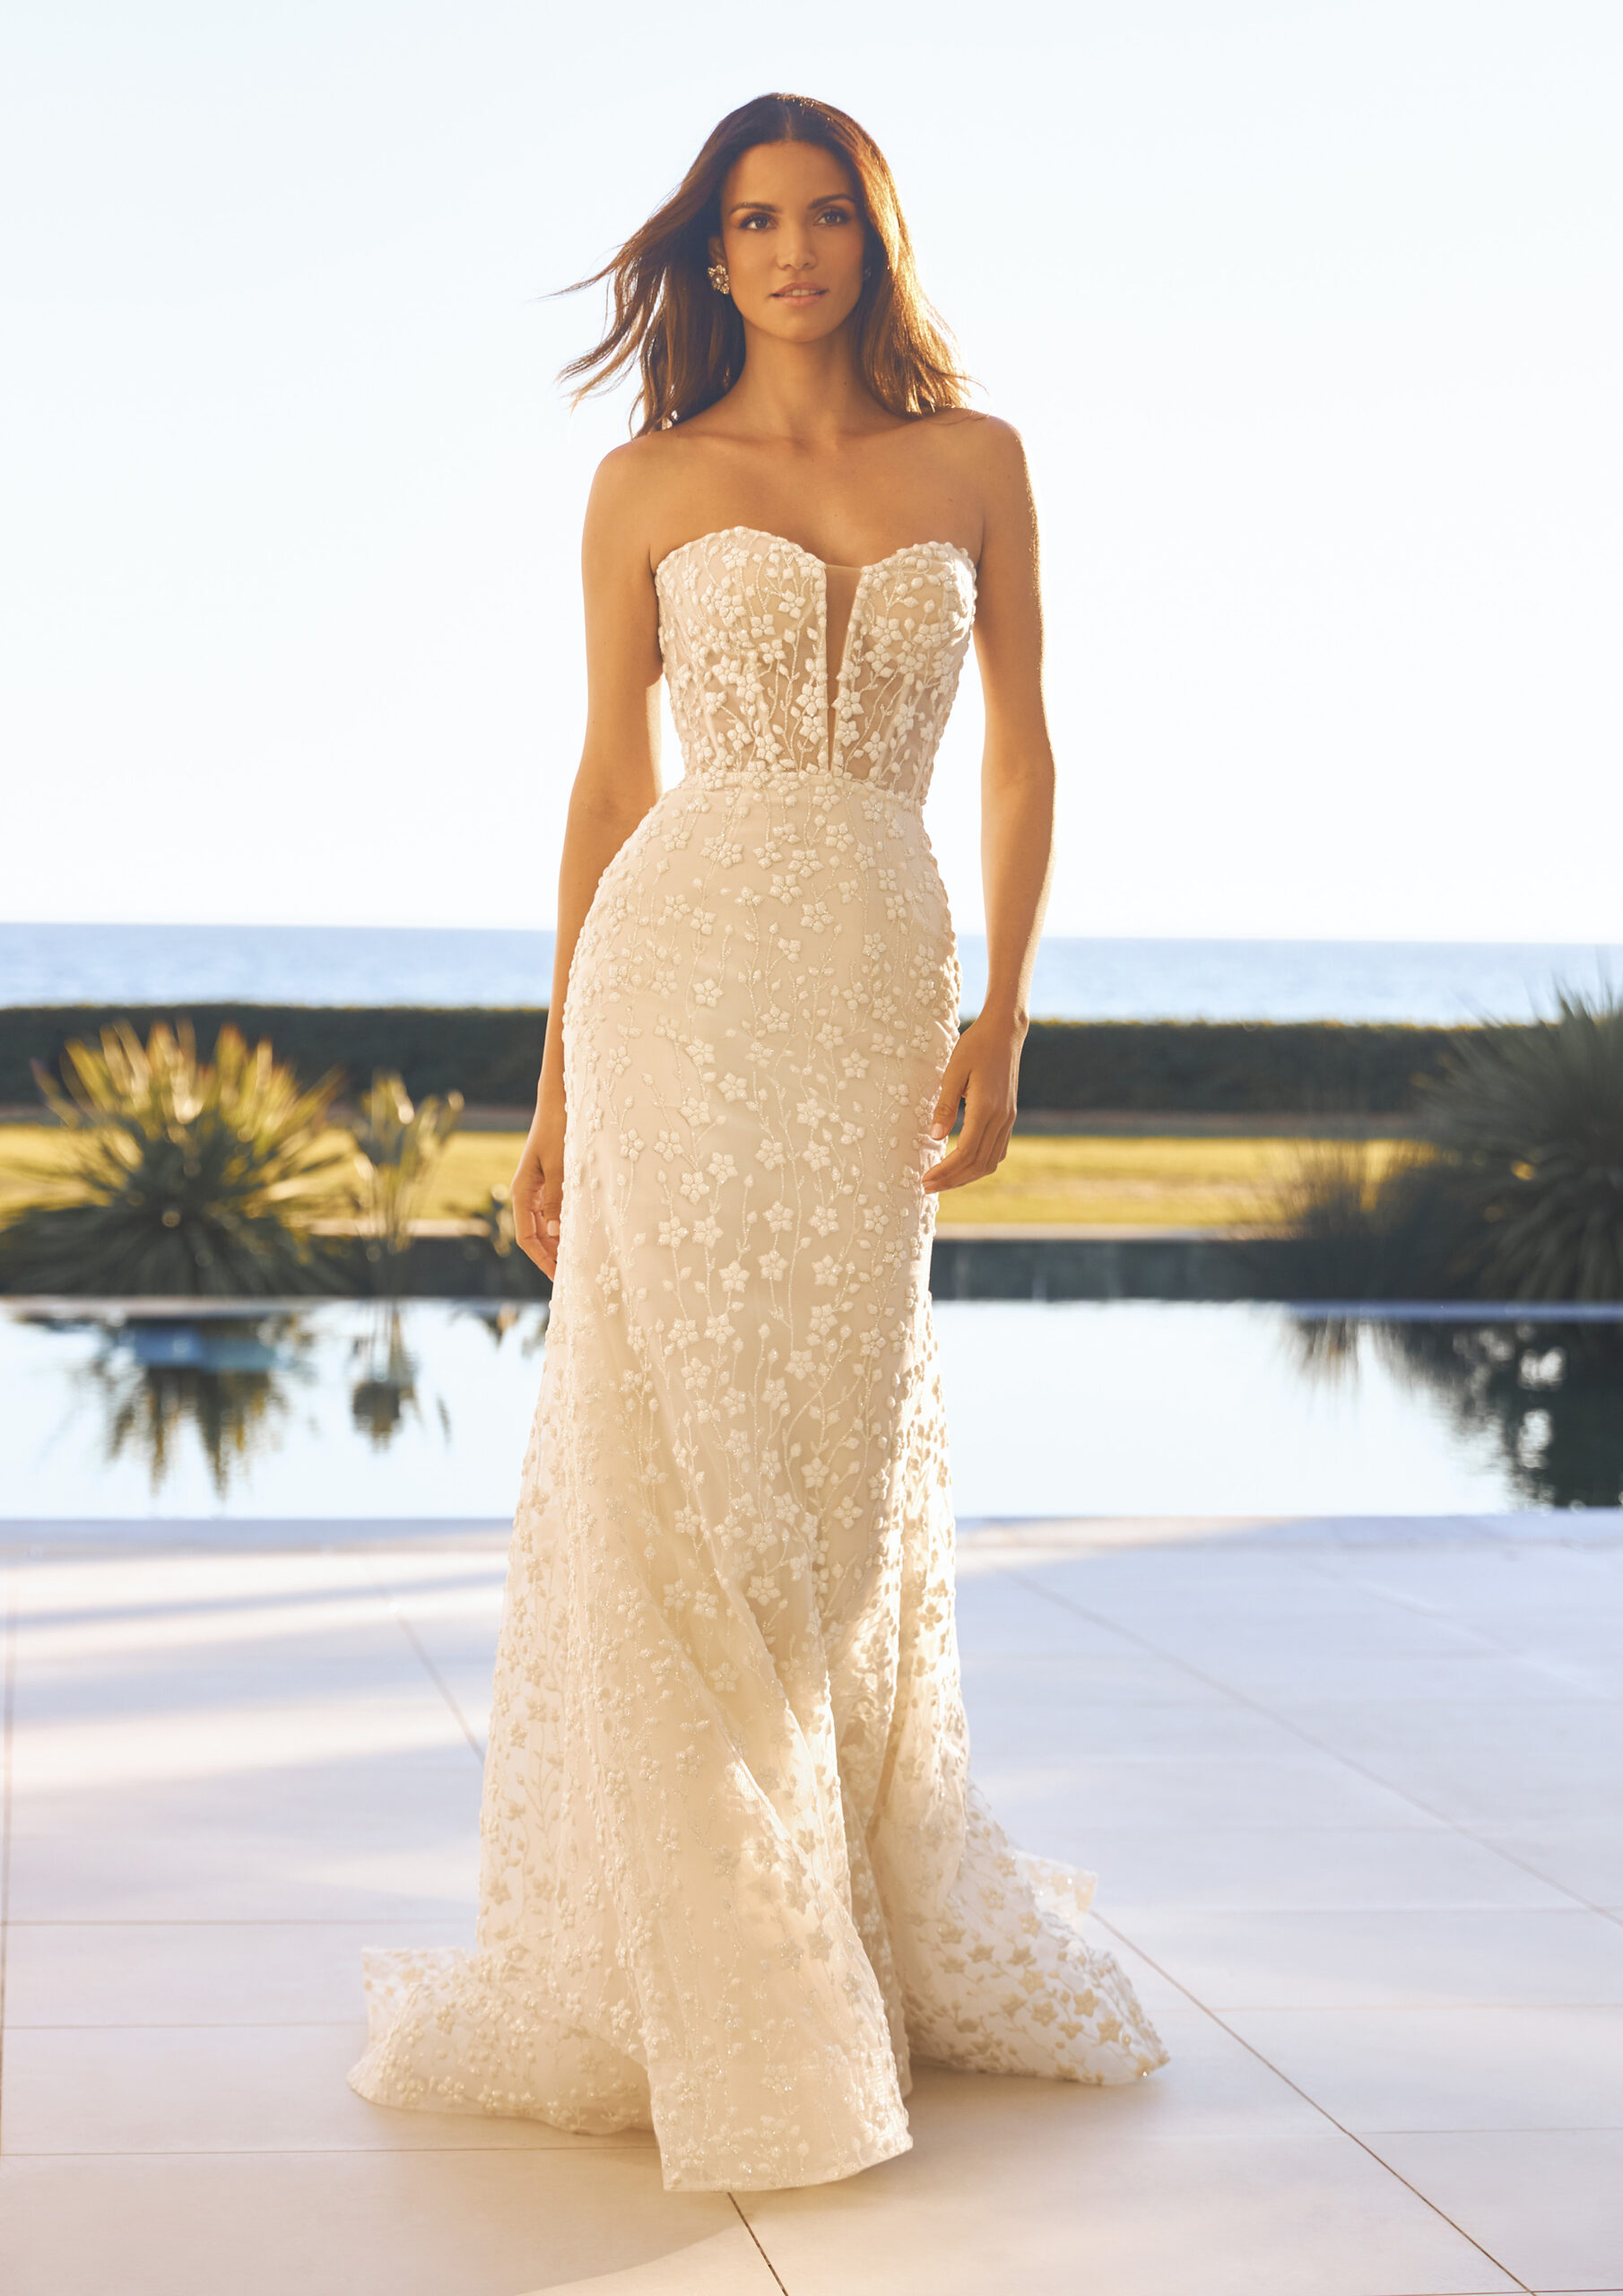 Phoebe is a modern, sparkling lace, mermaid style wedding dress by Pronovias. It's available in Belladonna Bridal, Galway City.